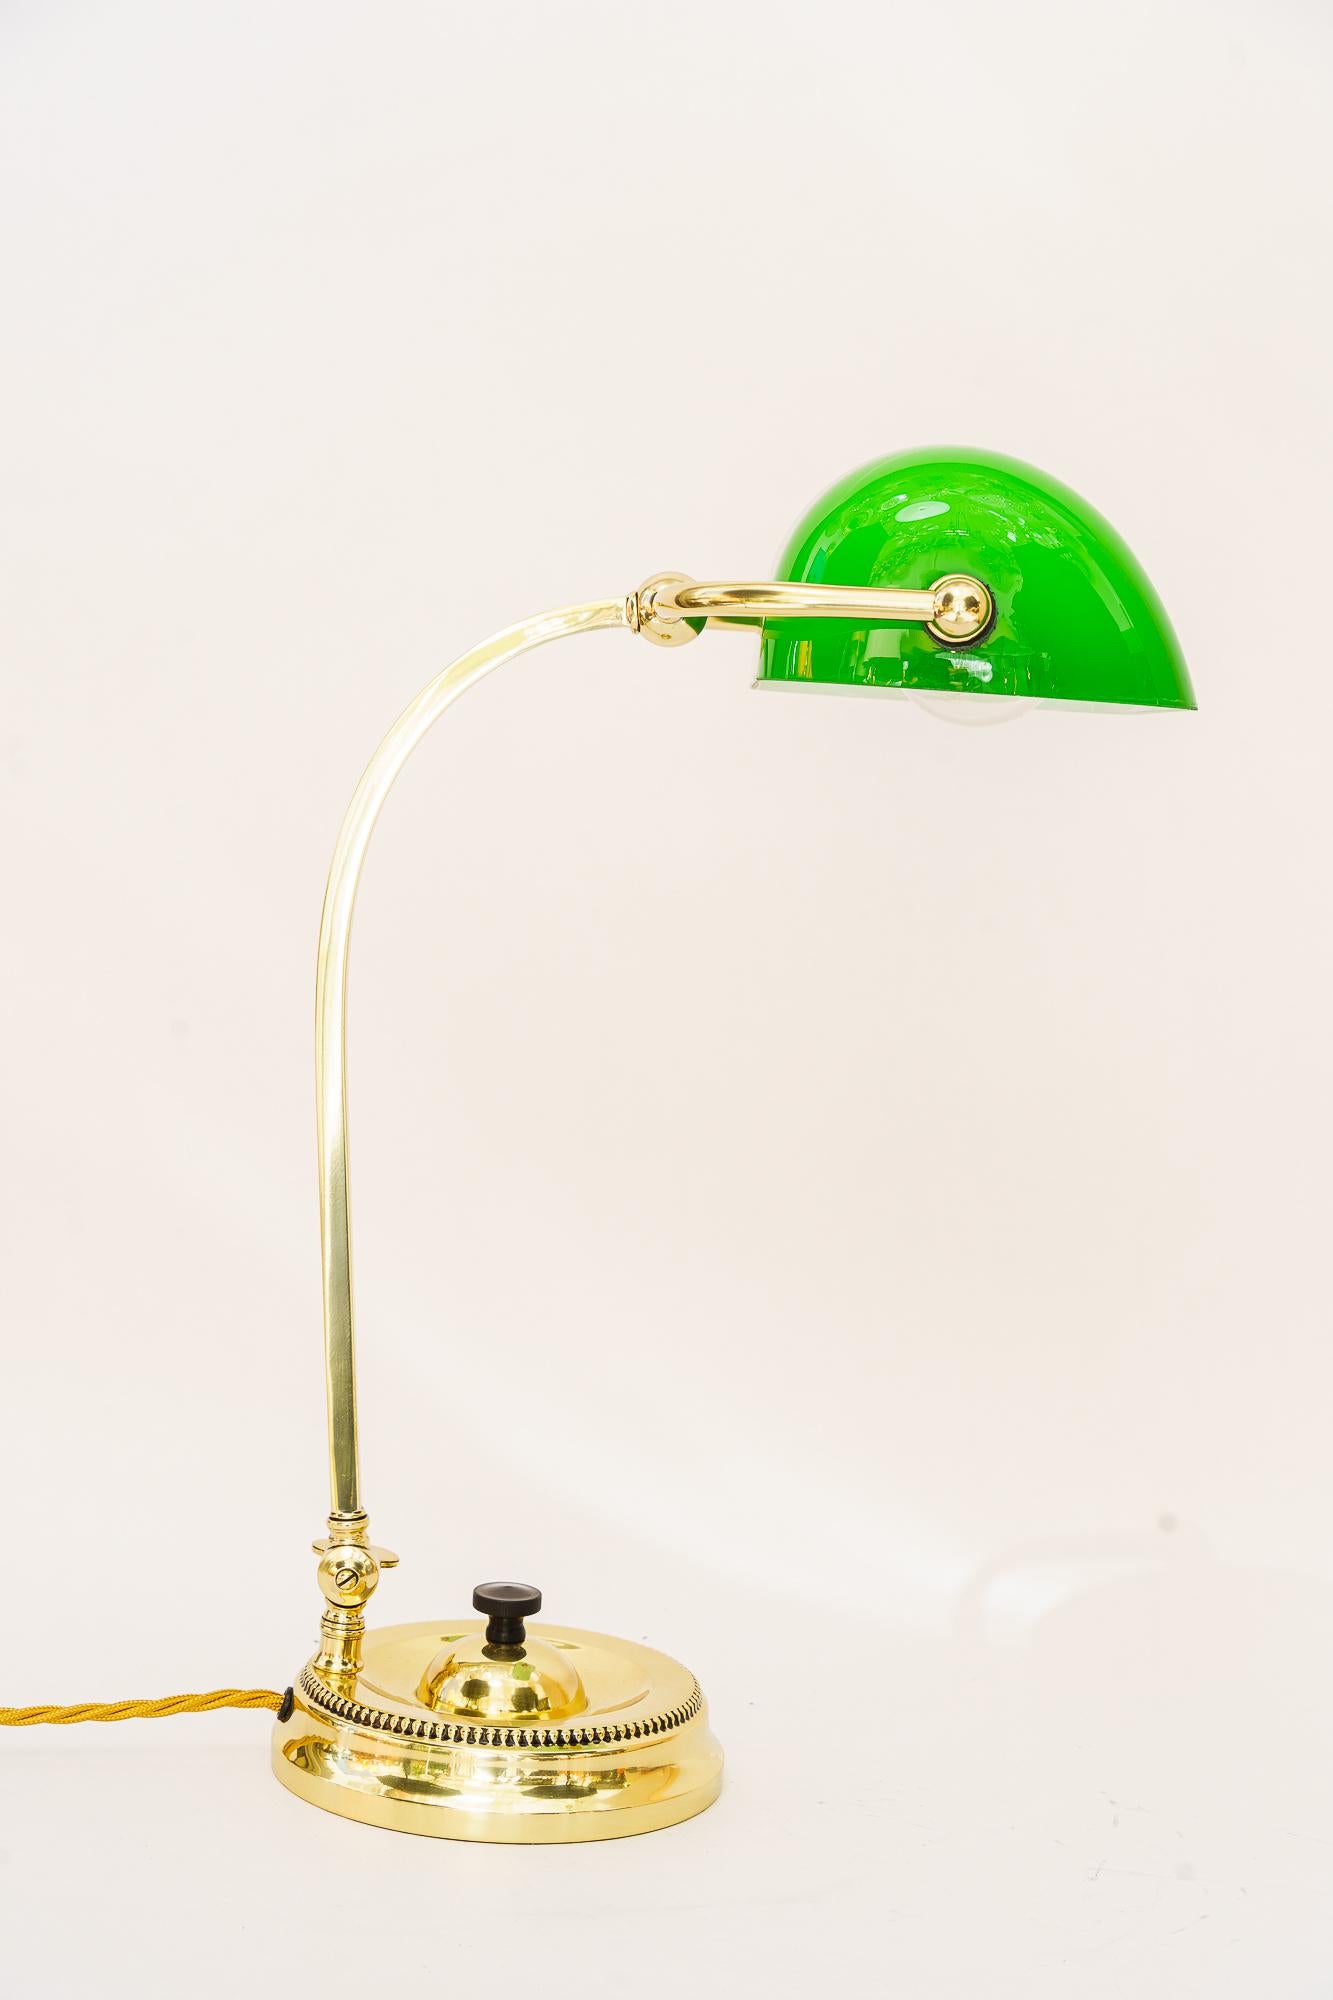 Art Deco swiveling banker table lamp with green glass vienna around 1920s
Polished and stove enameled
Deep from 27 up to 45cm
Black rotary switch